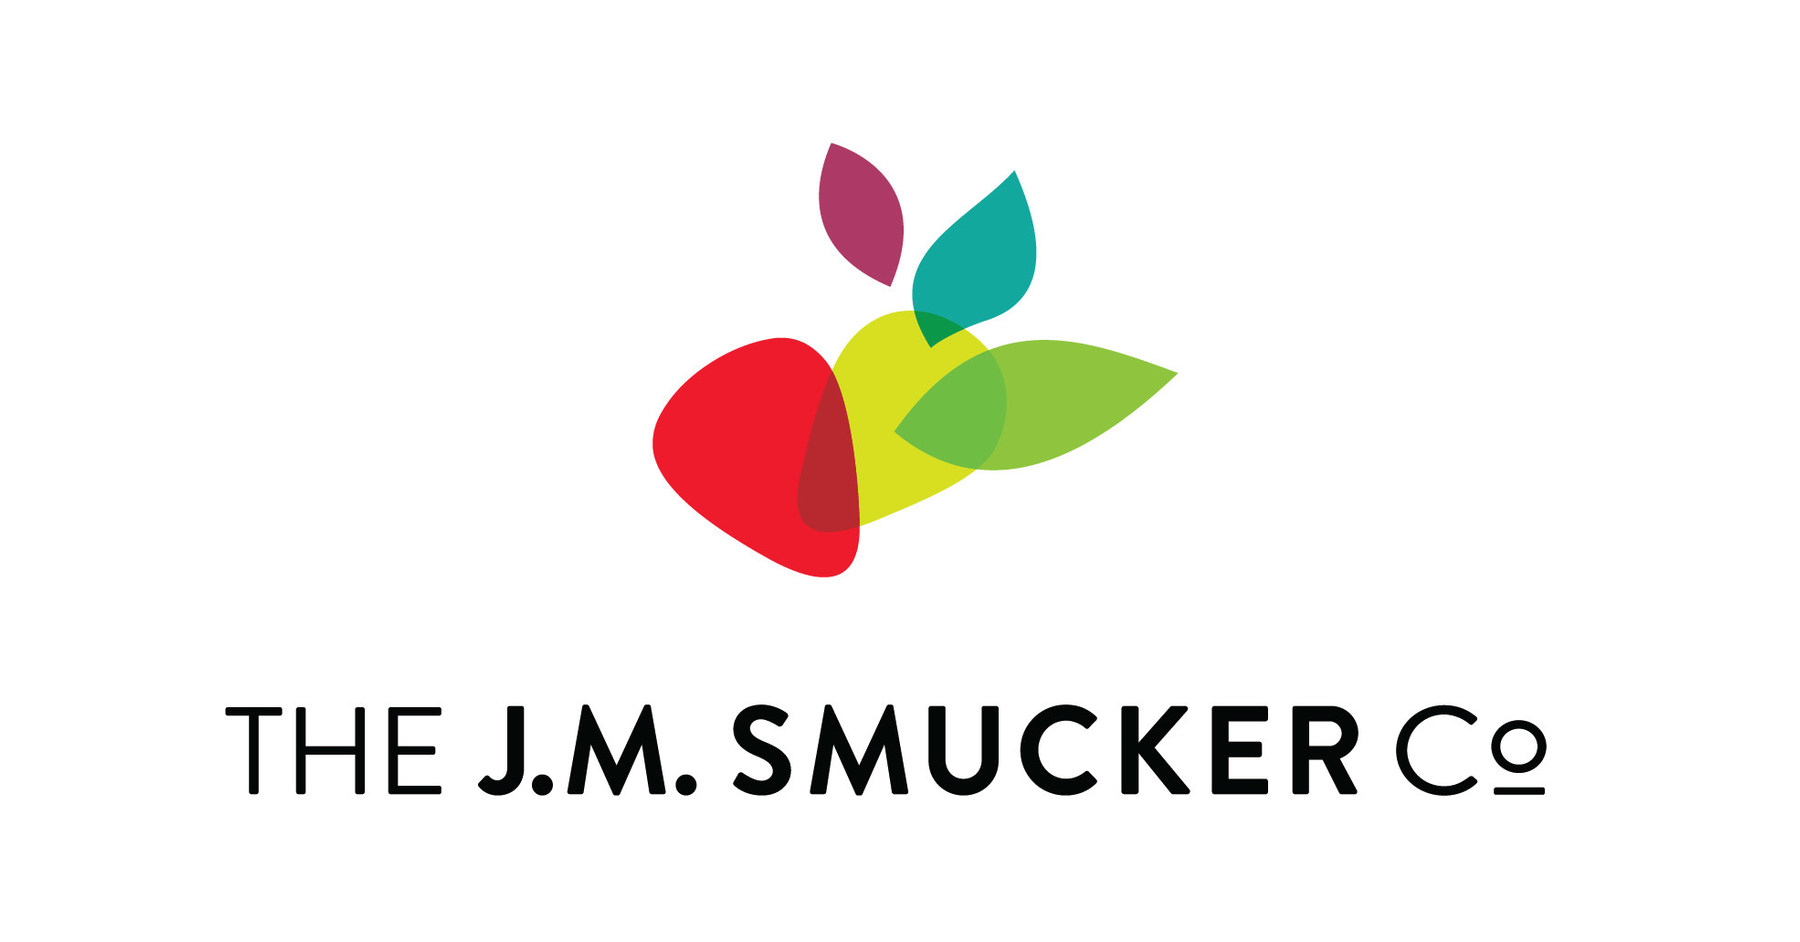  The J. M. Smucker Co. Issues Limited, Voluntary Recall of Two Lots of Meow Mix® Original Choice Dry Cat Food for Potential Salmonella Contamination 